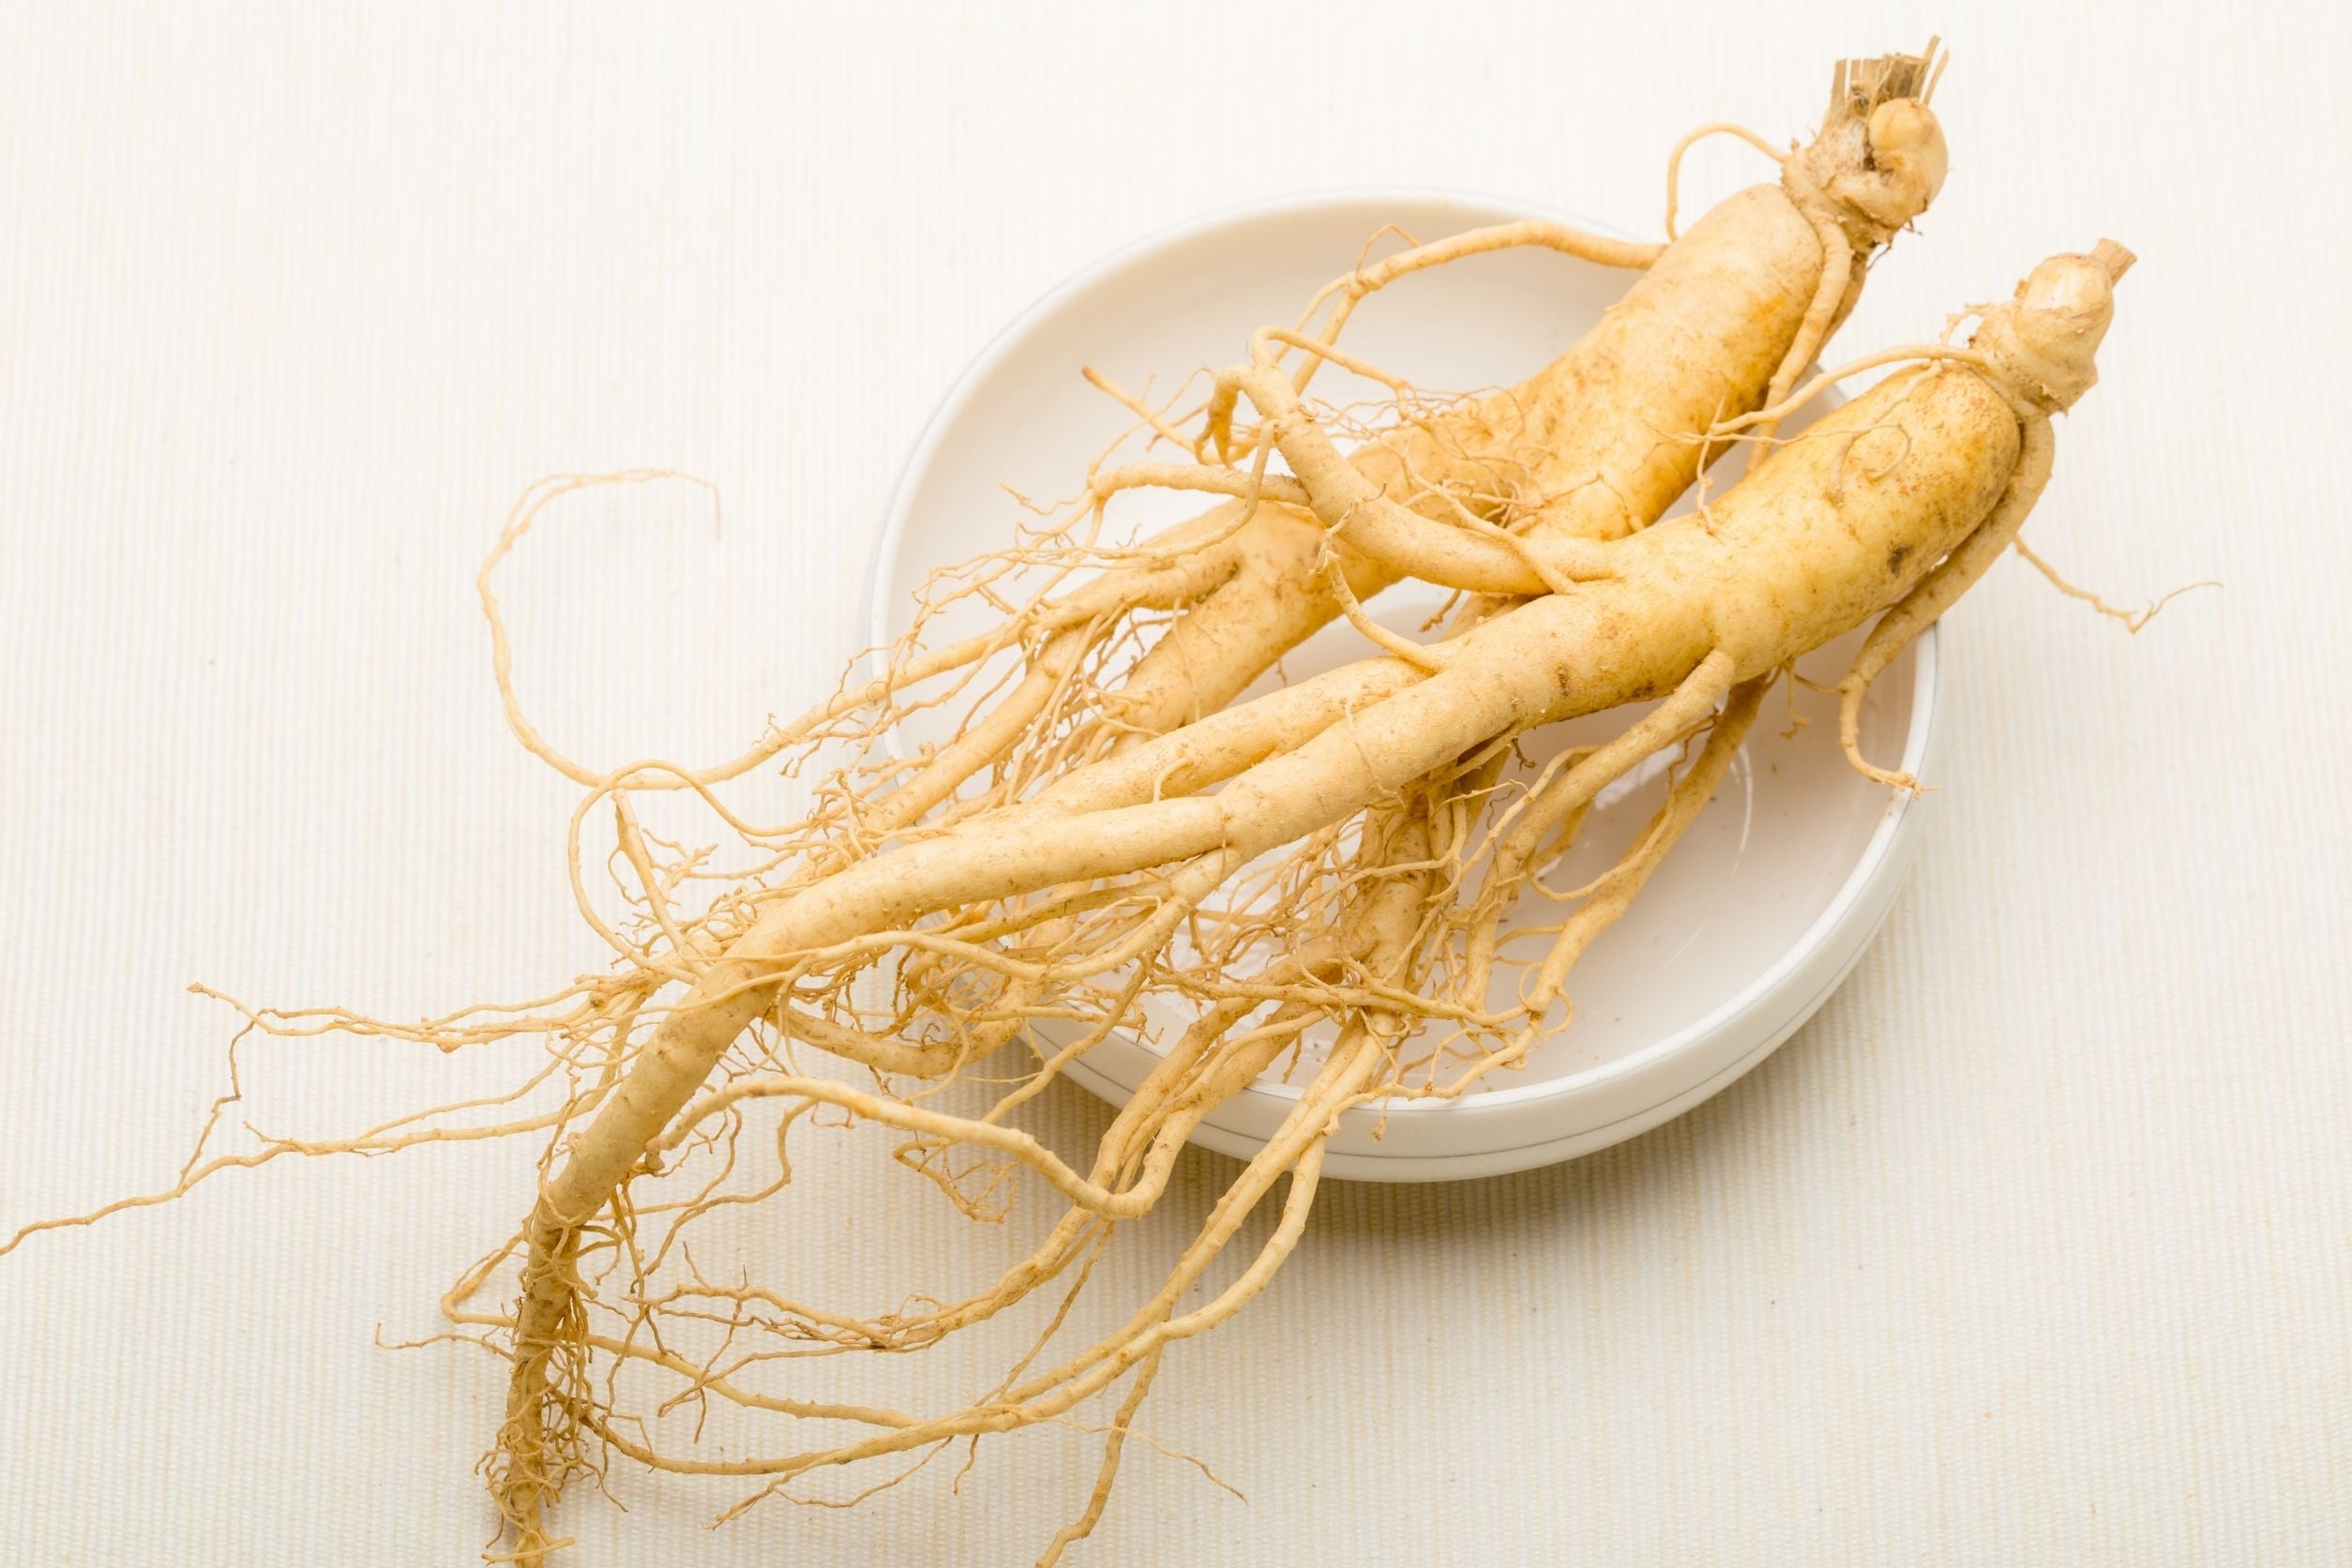 Ginseng and Other Supplements That Can Help Boost Hair Growth